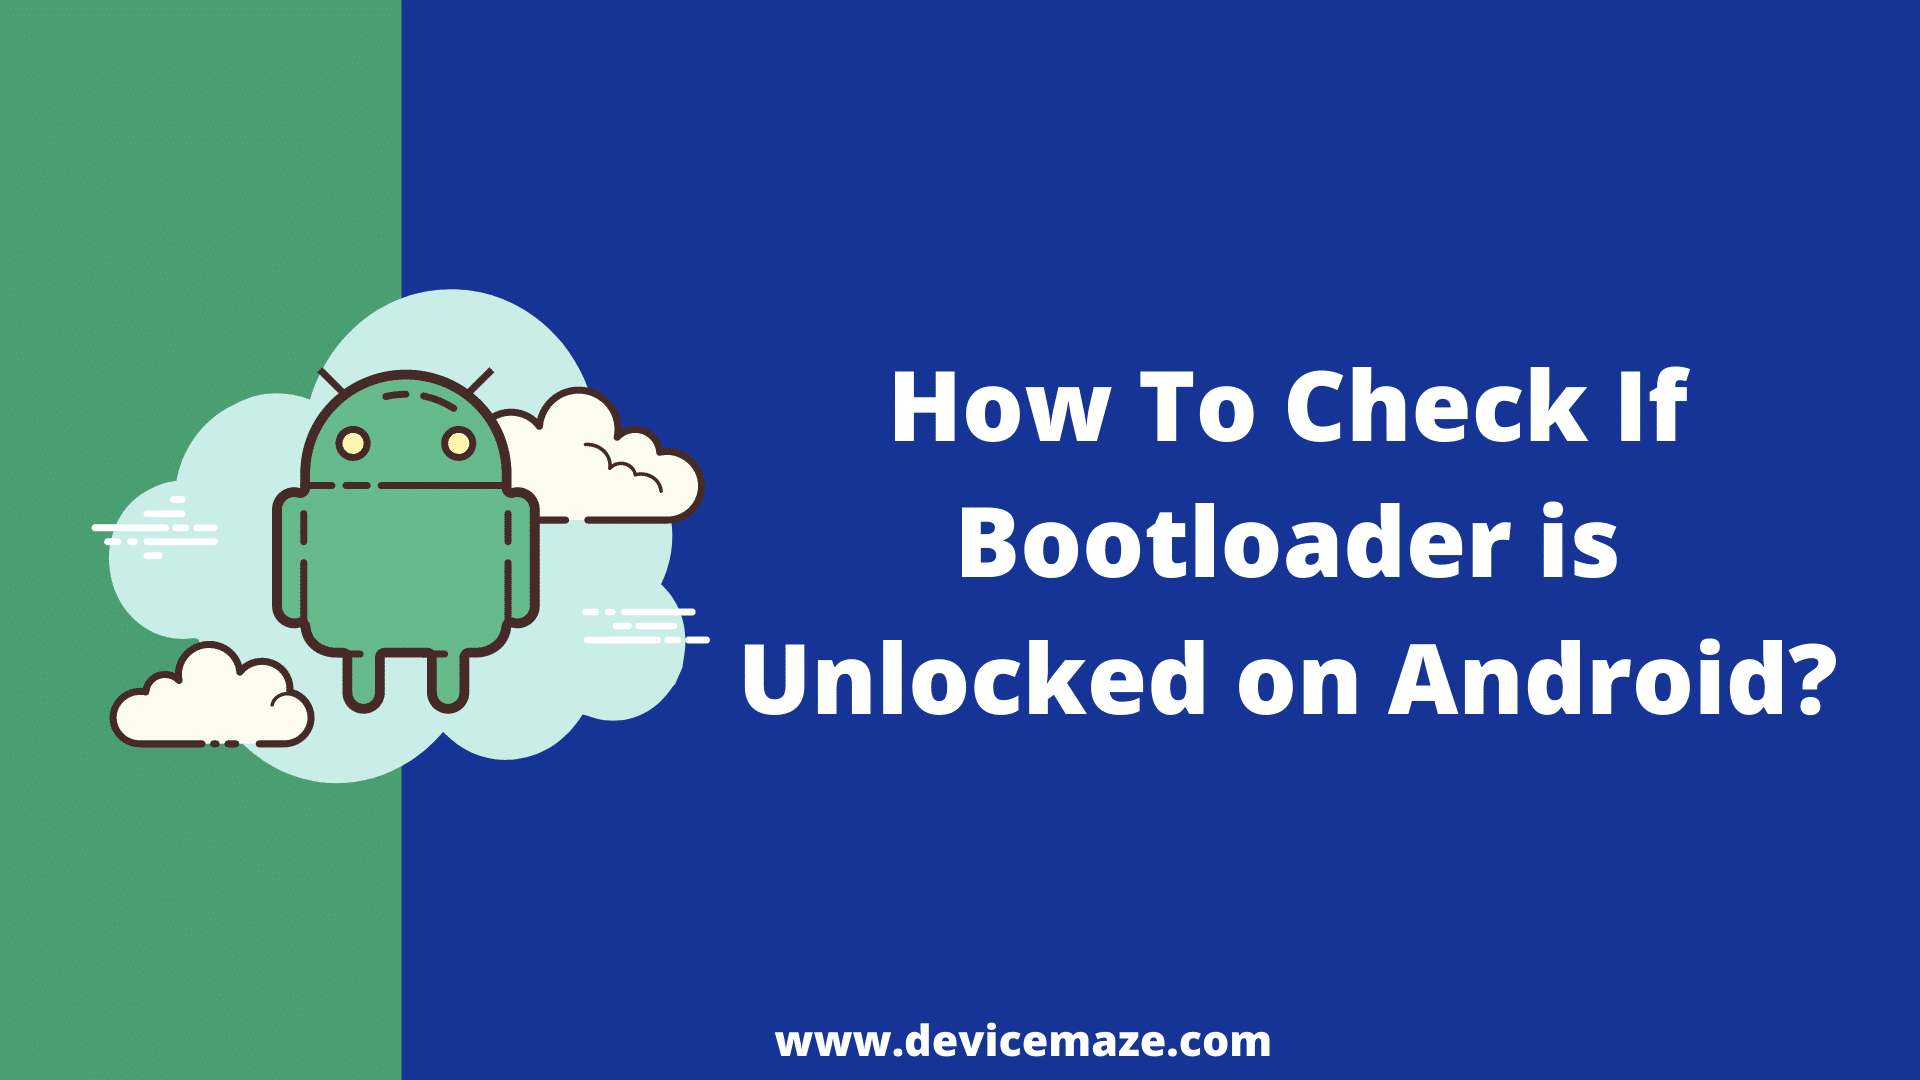 How To Check If Bootloader is Unlocked